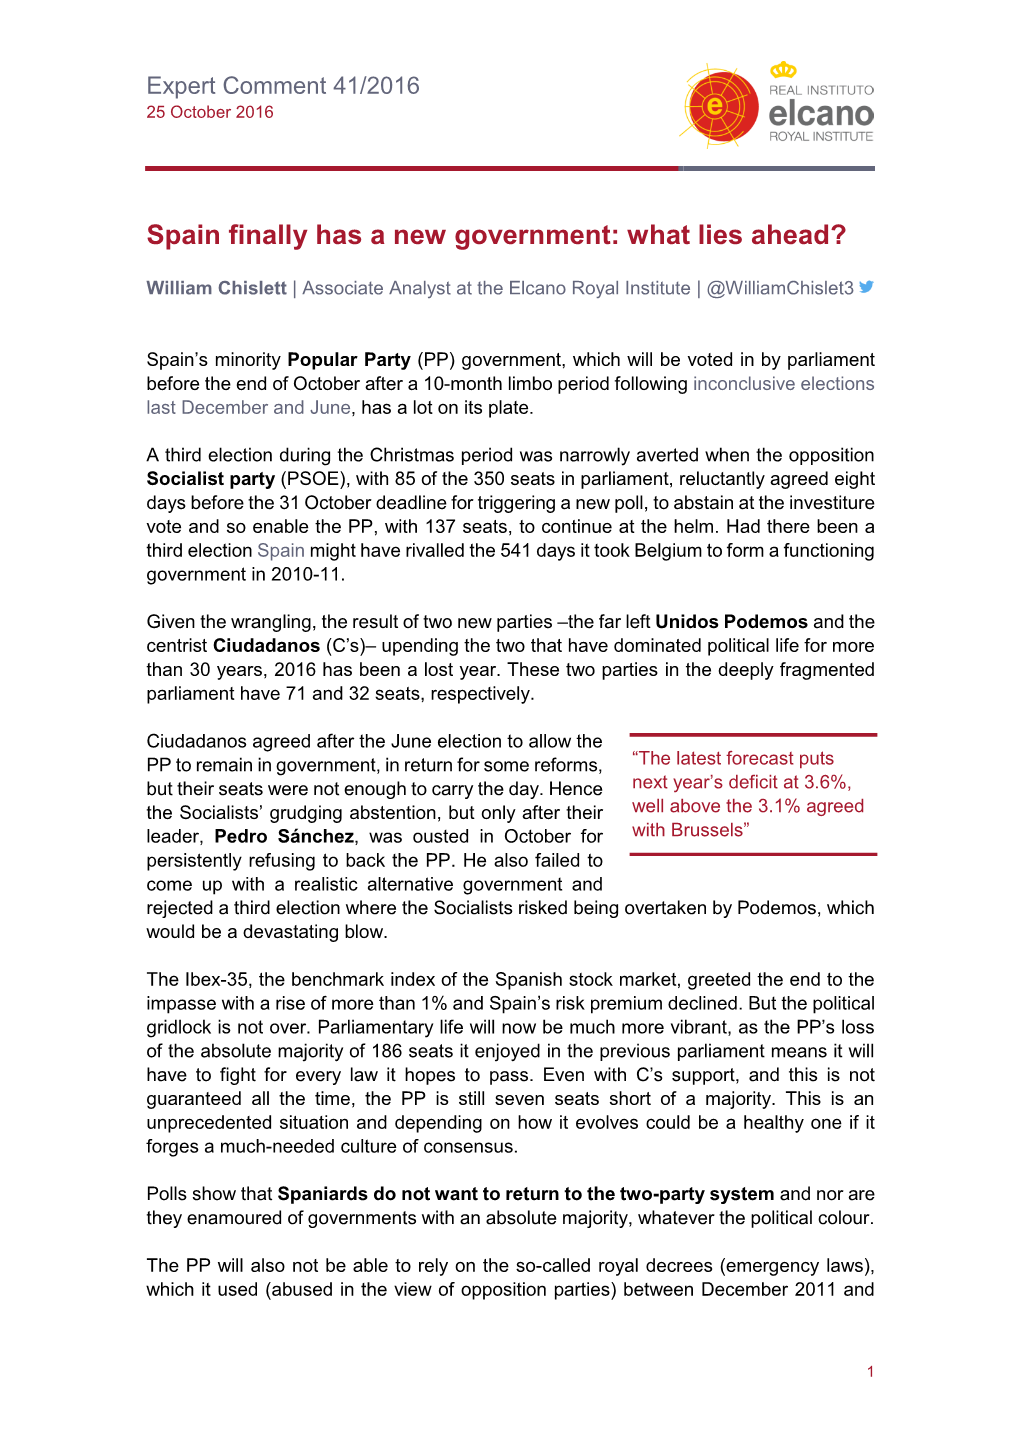 Spain Finally Has a New Government: What Lies Ahead?